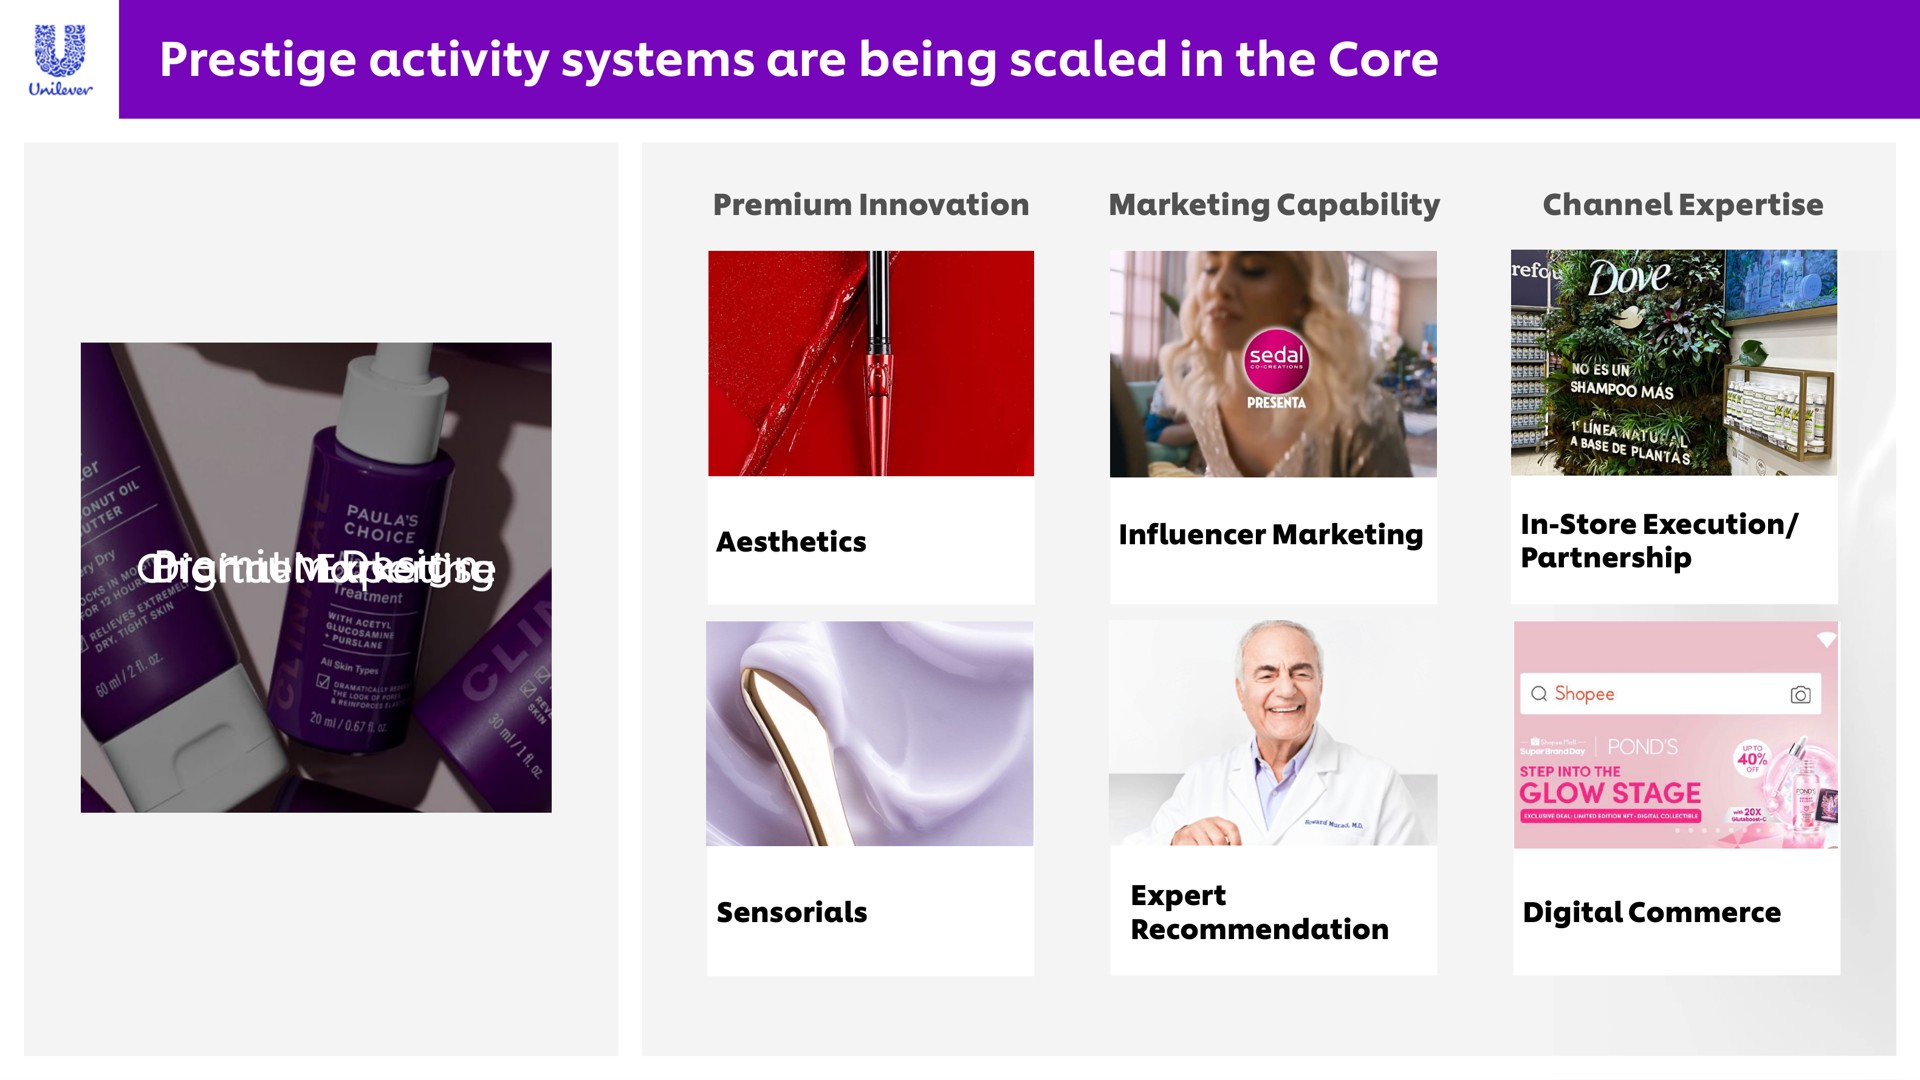 prestige activity systems are being scaled in the core | Unilever